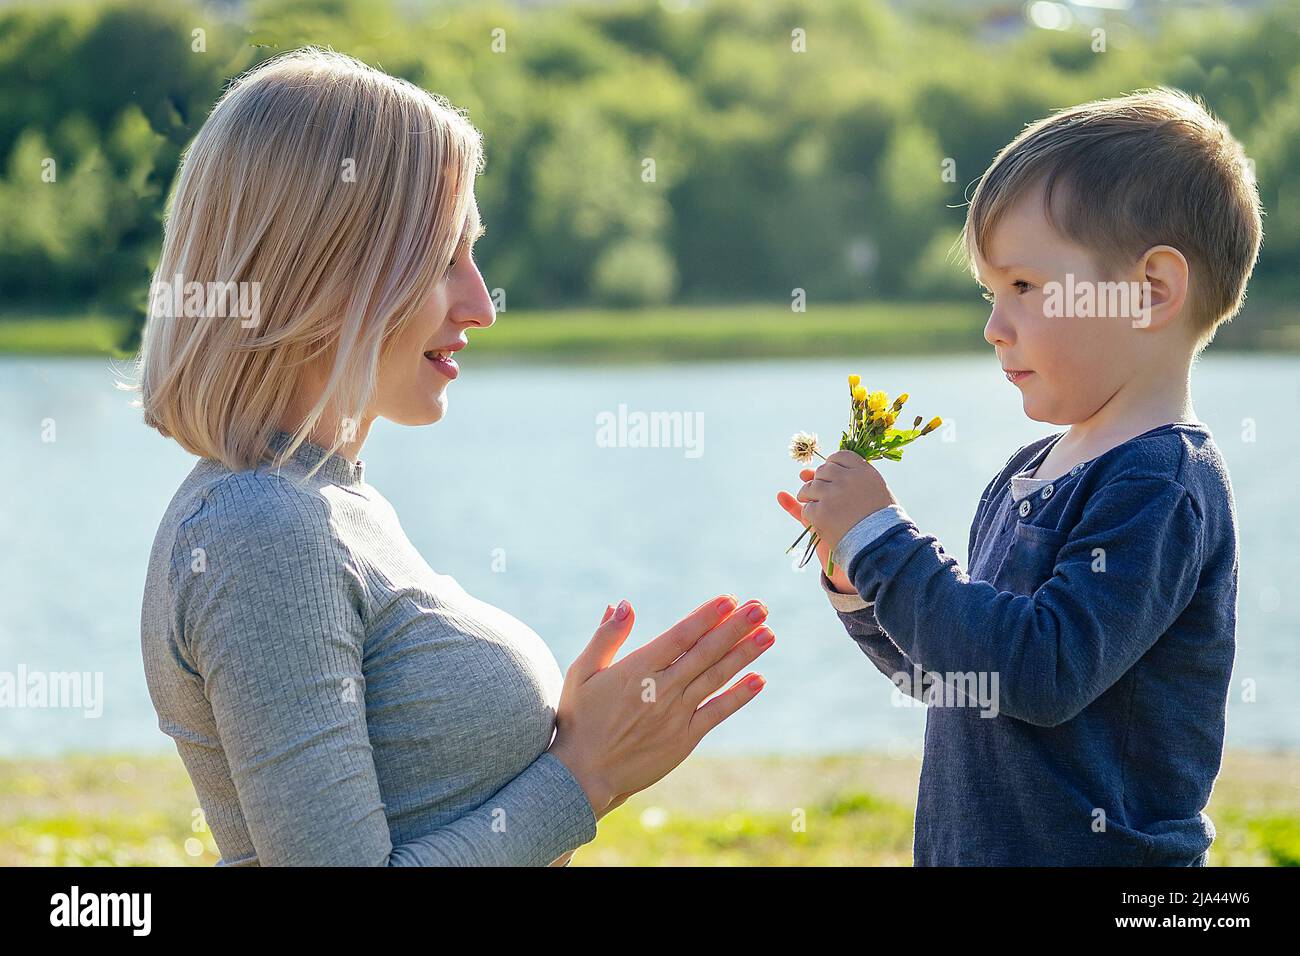 cute baby (son) gives a gift flowers to his beautiful blonde mother in the park on a background of green grass and lake . mother's day concept Stock Photo